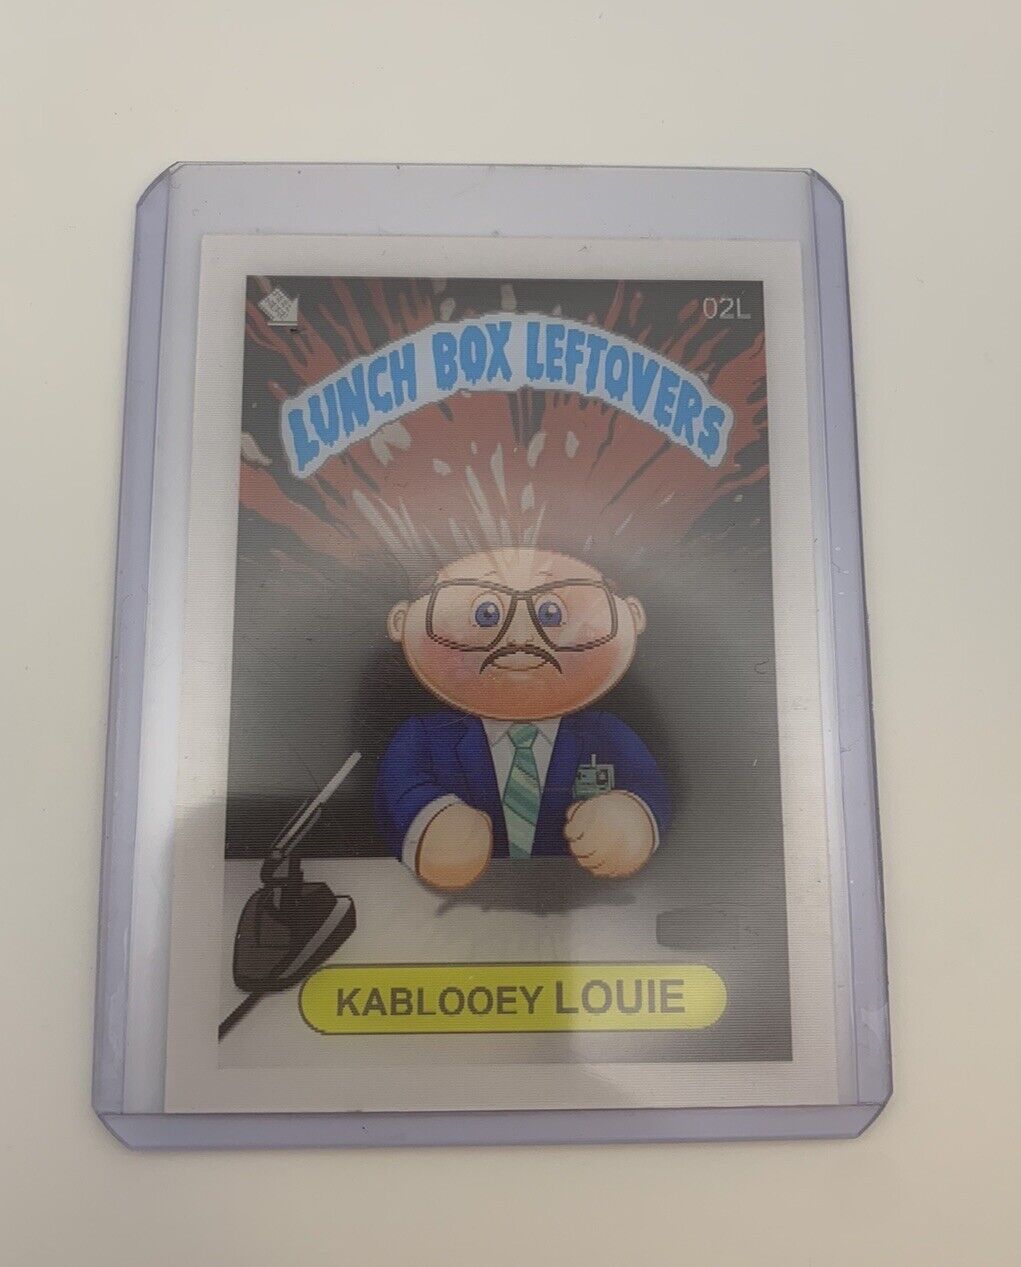 2023 LUNCH BOX LEFTOVERS LENTICULAR CARD 02L KABLOOEY LOUIE